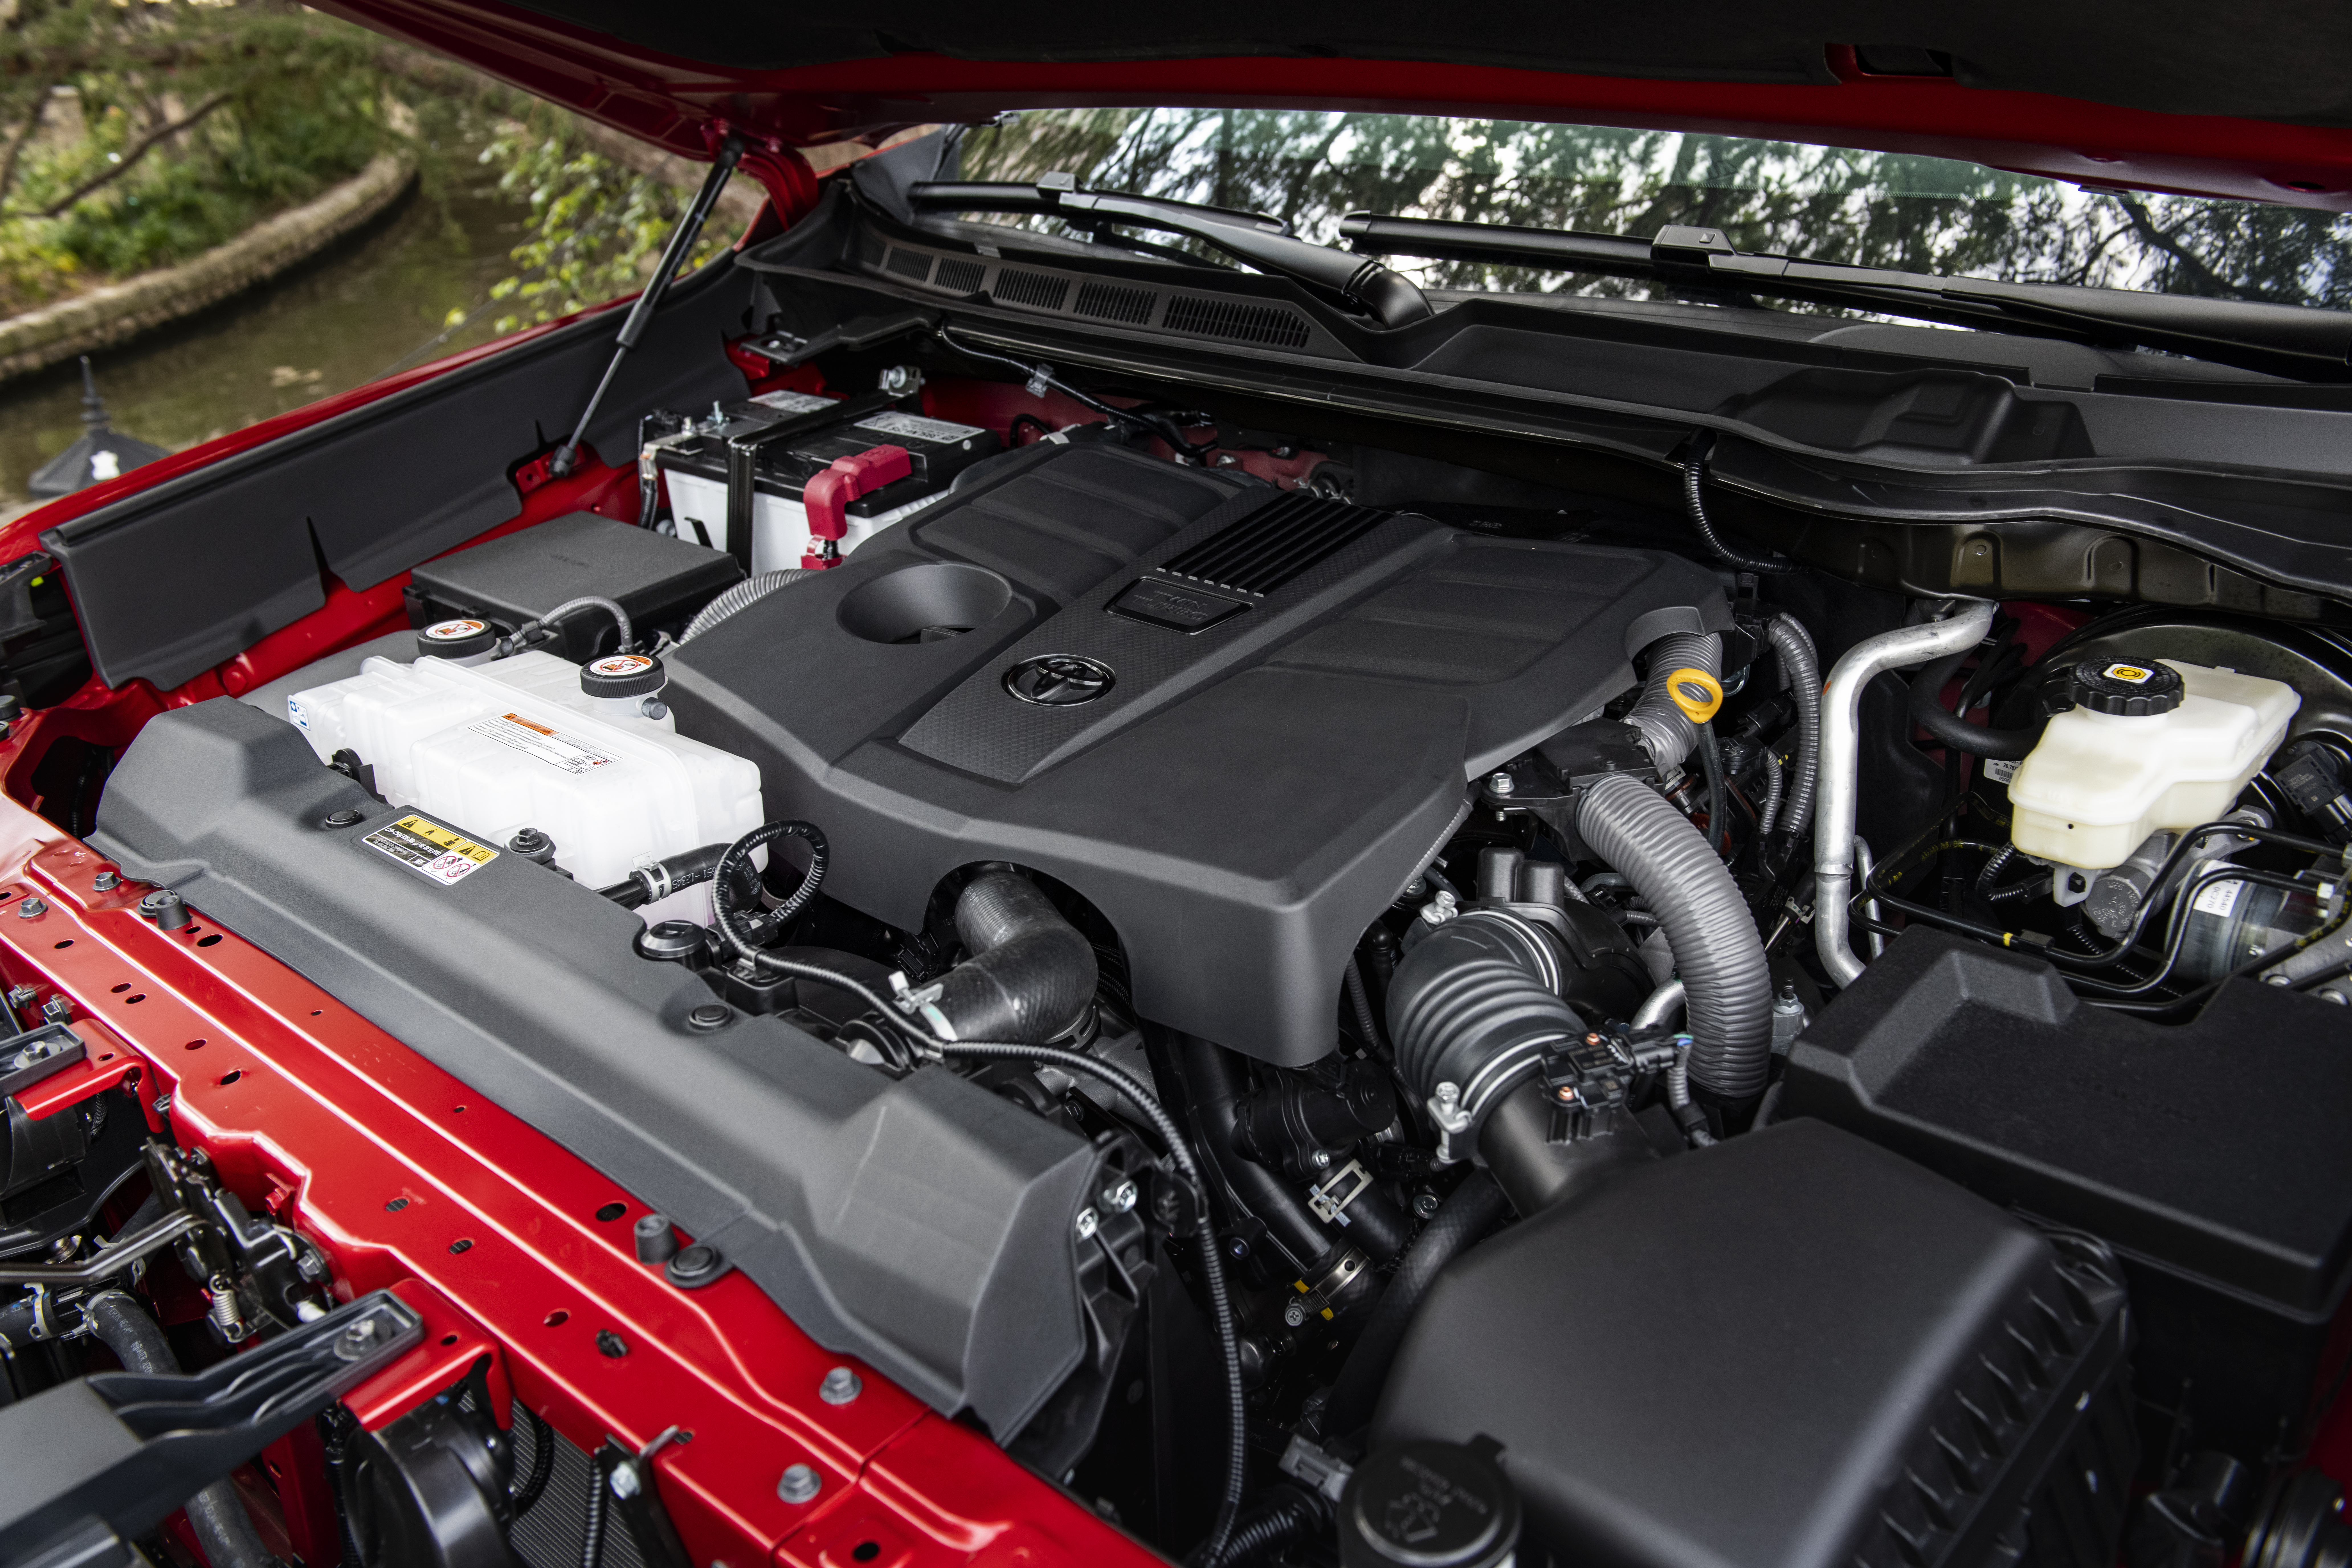 You'll get more power from Tundra's new V6 engines.